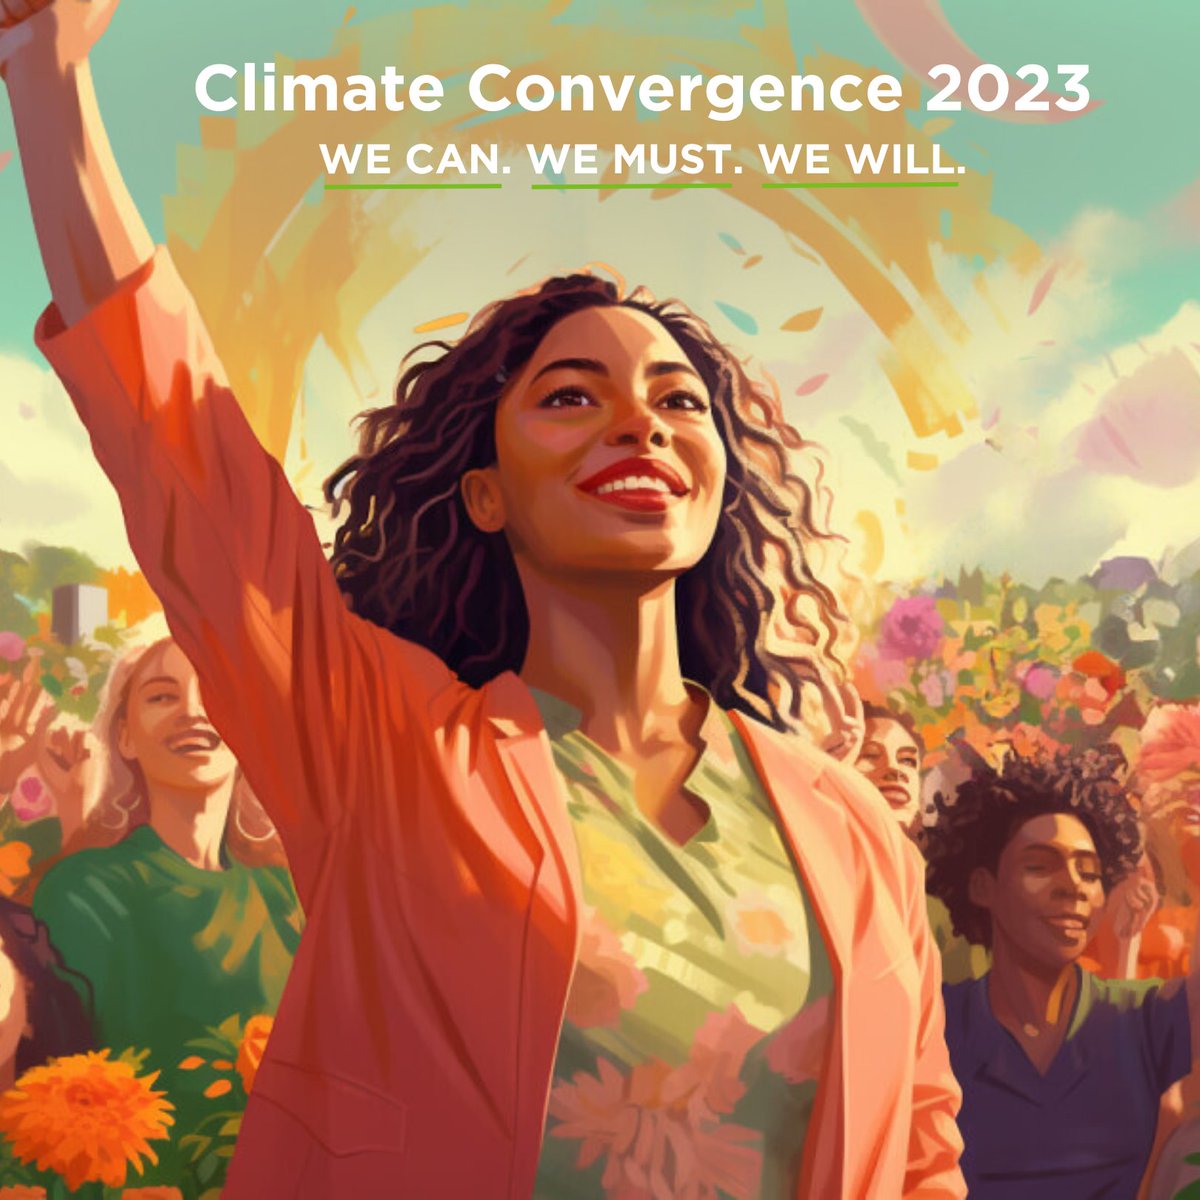 One of the best ways to feel more JOY is to work towards a cause that you believe in. So let's create a happier, healthier, and more joyful world together! Join us free online for the @PachamamaOrg Climate Convergence summit on October 5th: hubs.li/Q022m9k50